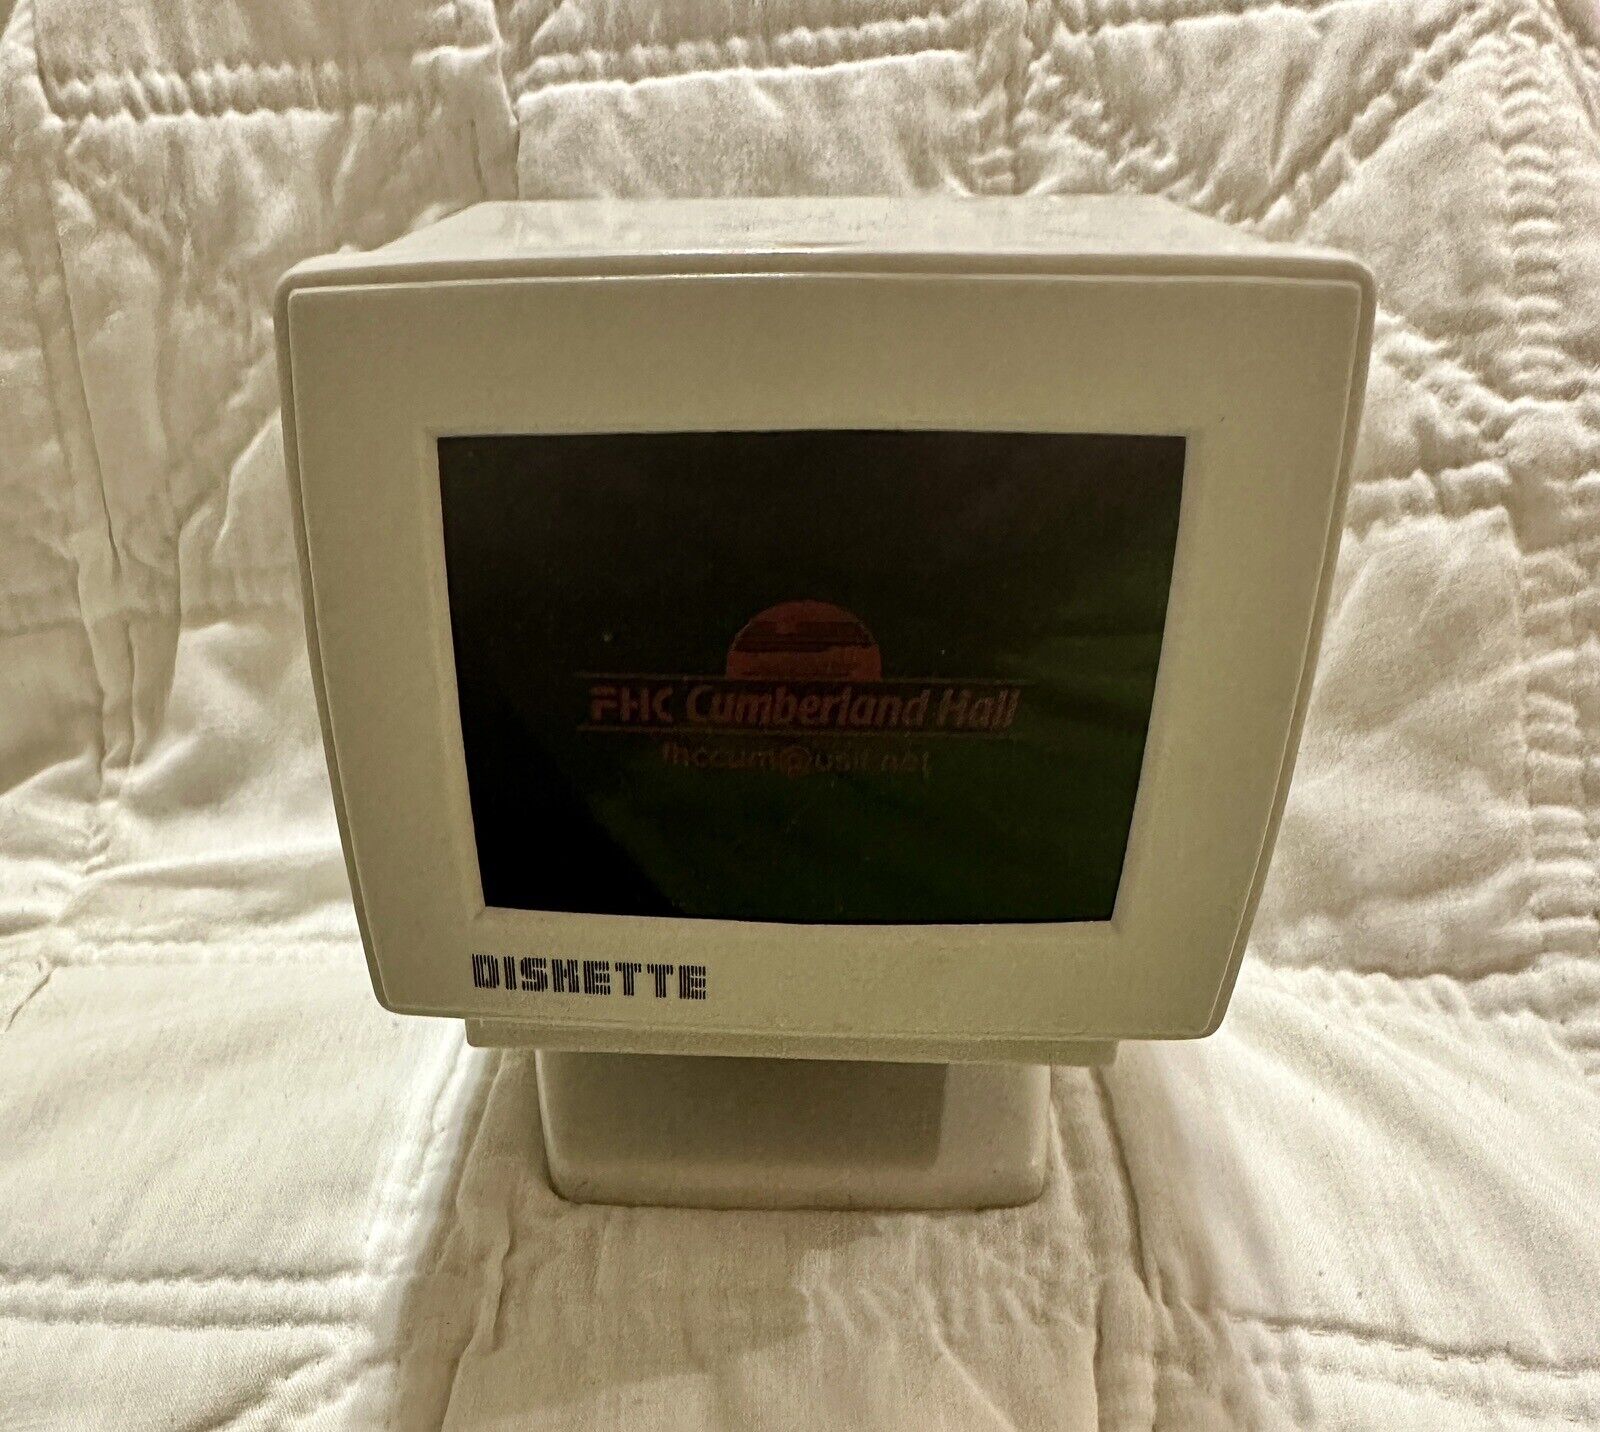 Vintage CRT Monitor Shaped Computer Diskette Storage Holder Geek Out Retro Cool